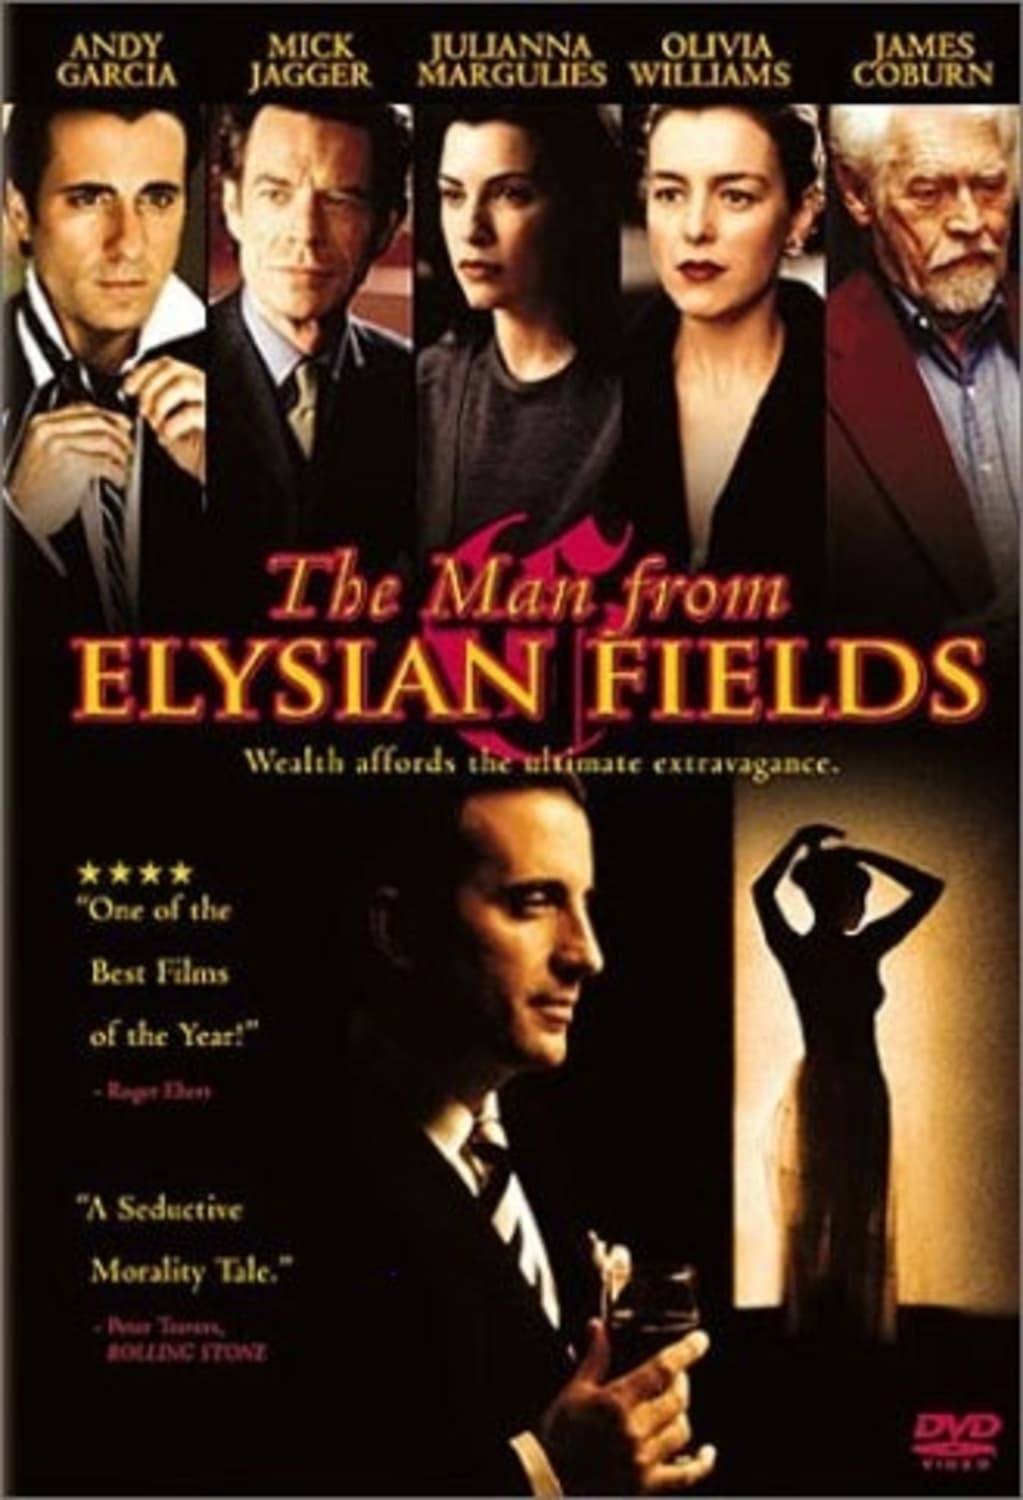 The Man From Elysian Fields (DVD) on MovieShack